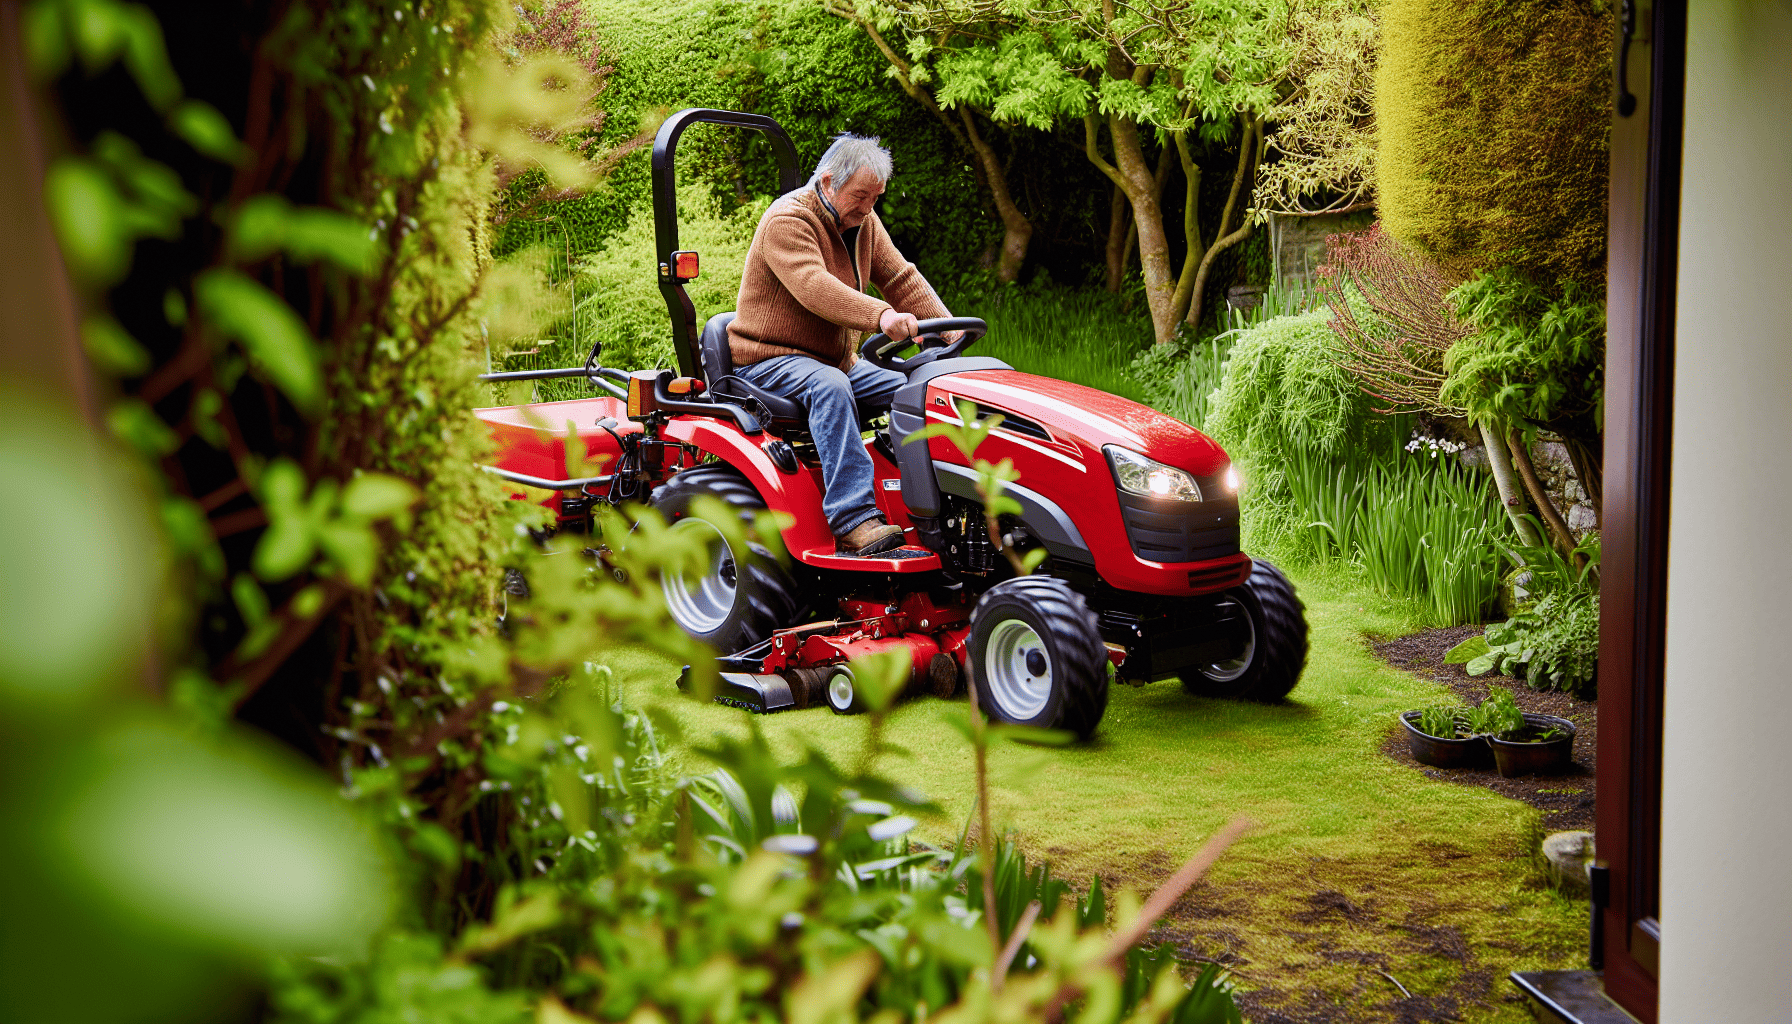 A compact tractor working in a garden